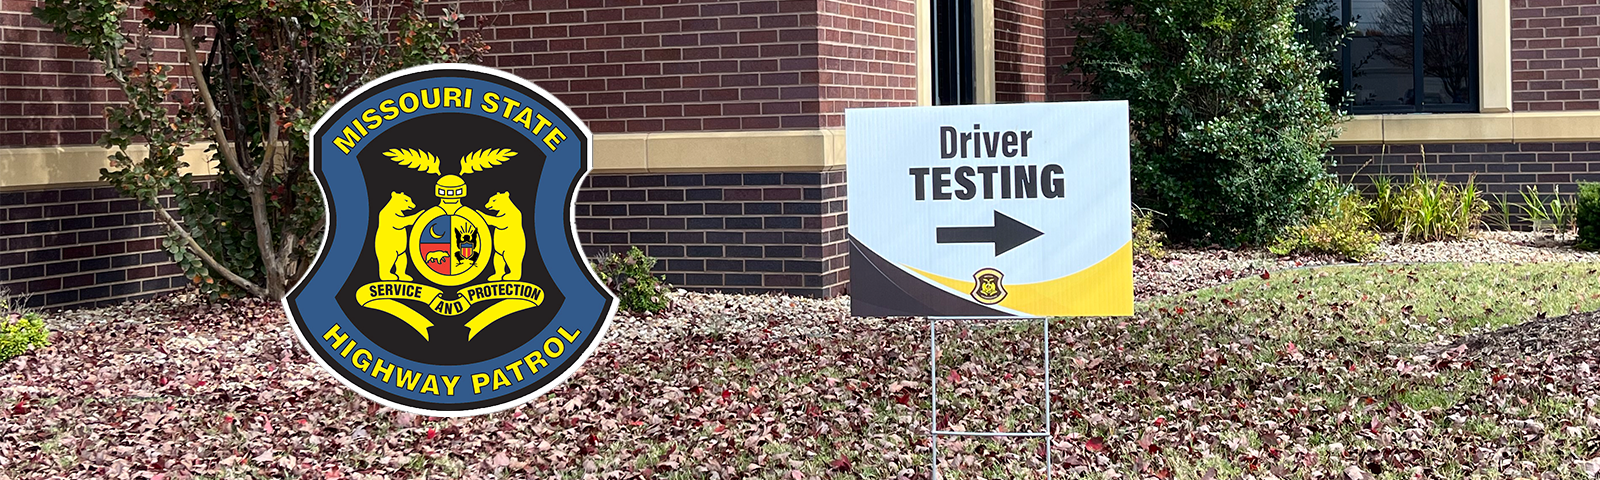 A sign indicates a driver testing site is to the right. The Missouri State Highway Patrol logo is superimposed next to the sign.